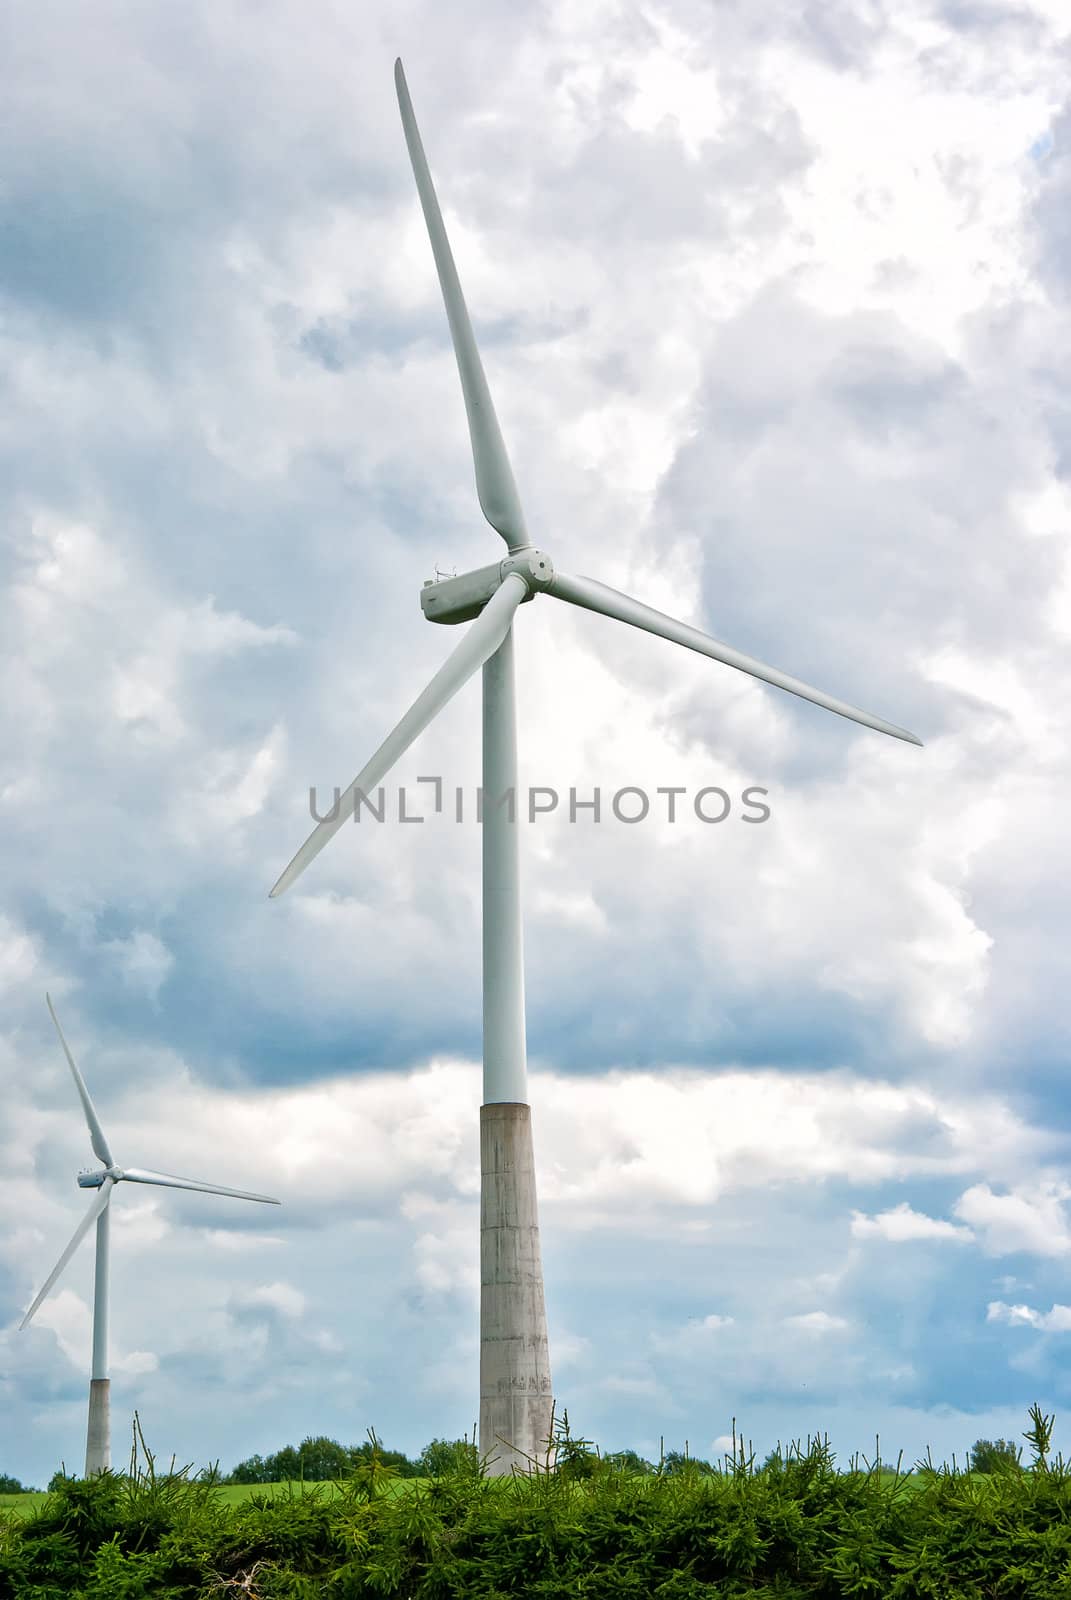 Two wind turbines on a cloudy sky background by dmitrimaruta